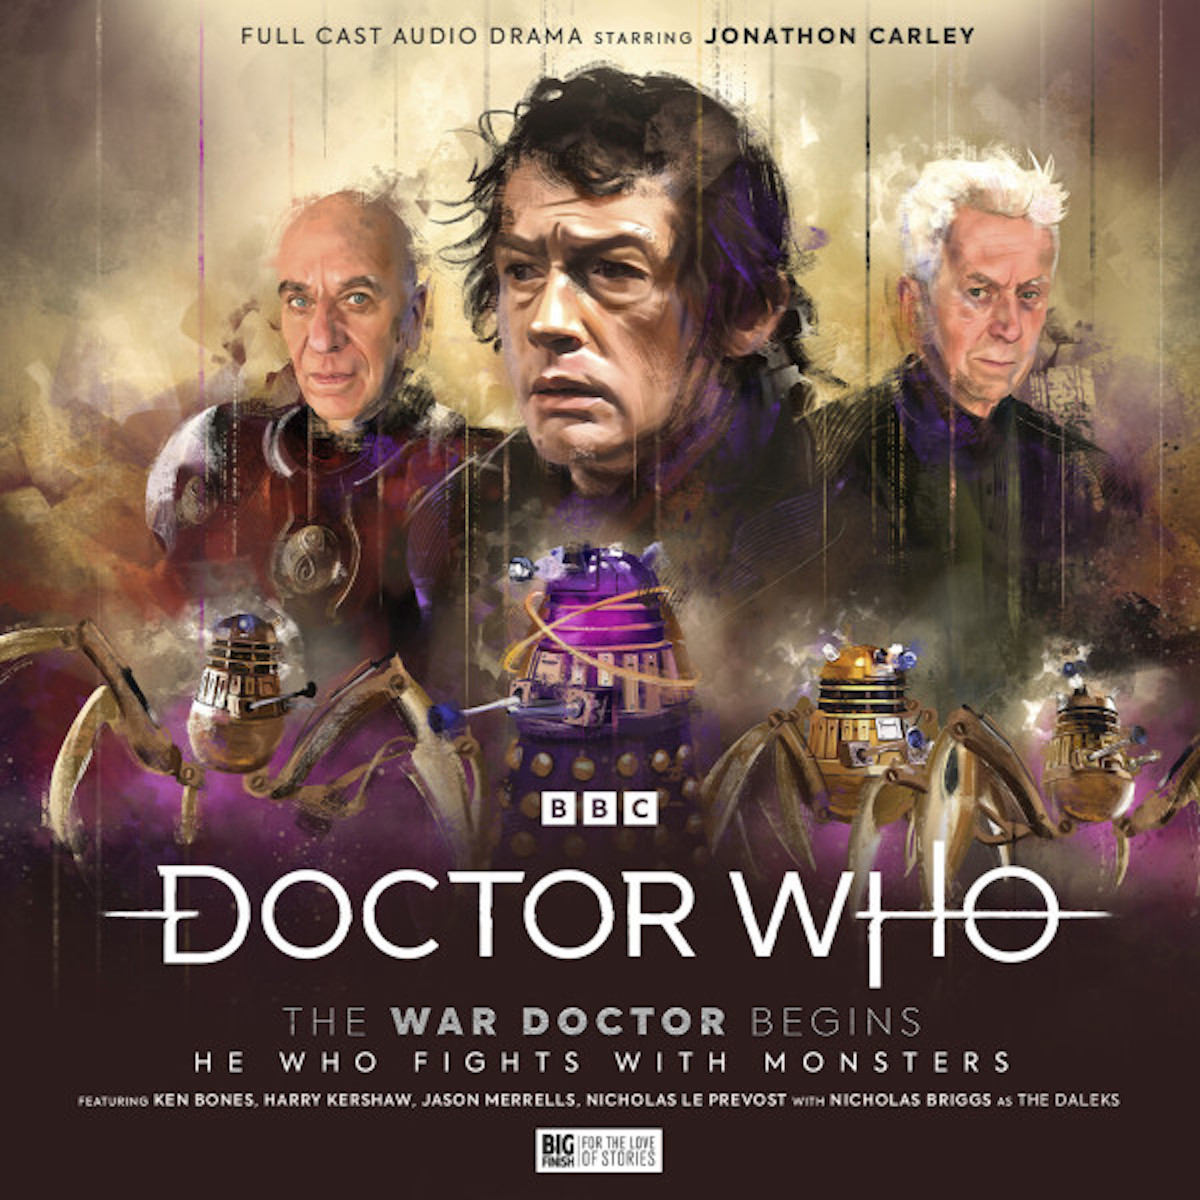 The War Doctor Begins: He Who Fights With Monsters